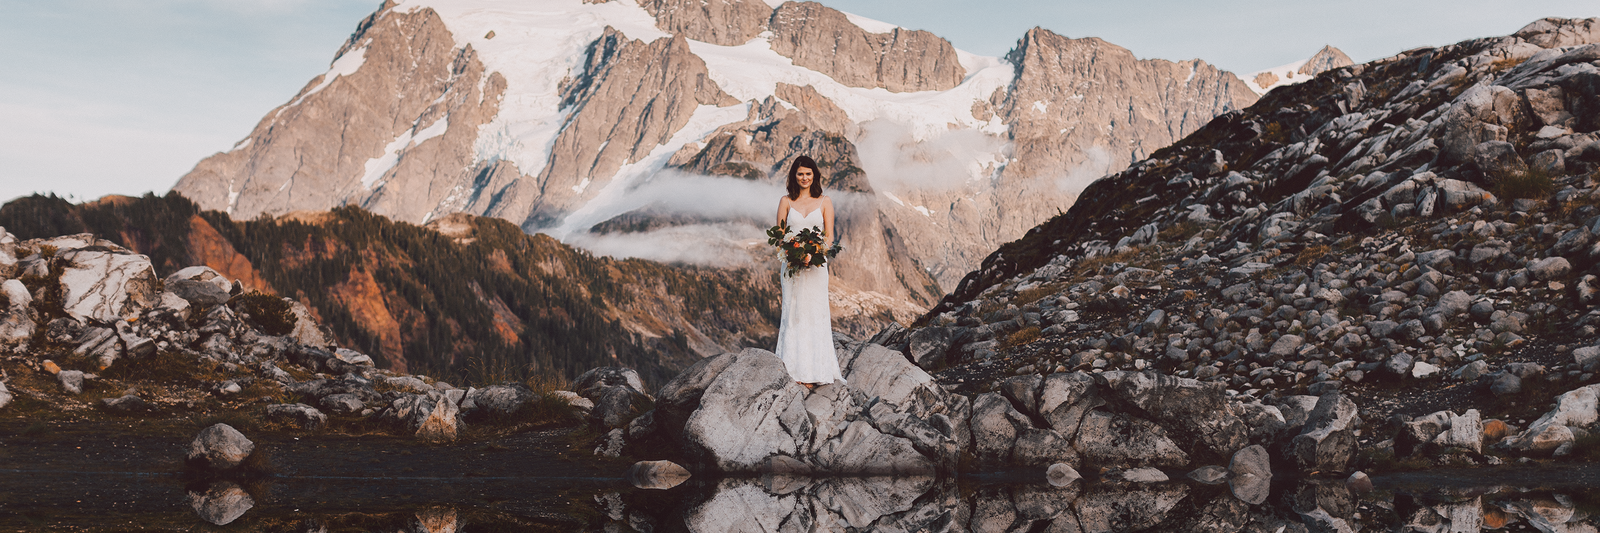 Mount Baker Aritst Point wedding bridal session by Kyle Goldie